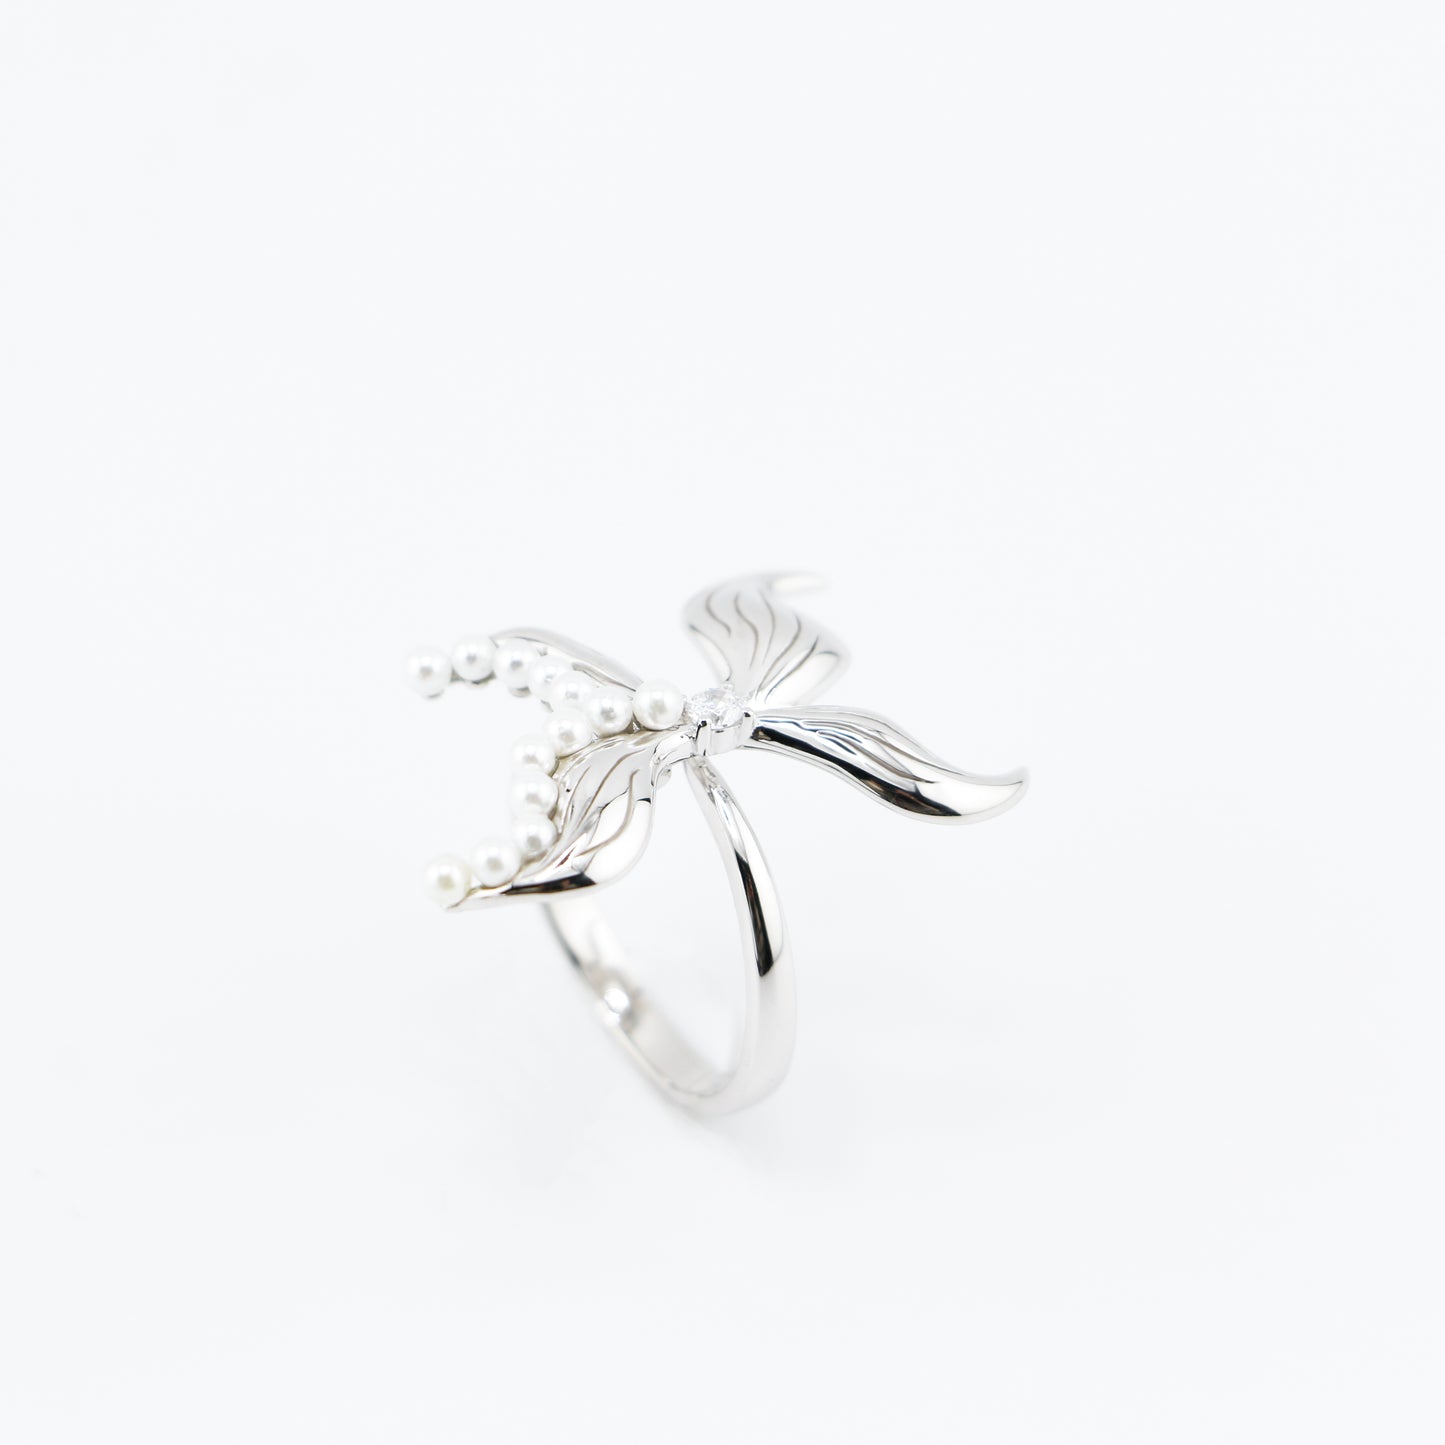 Symmetrical Whale Tail Shaped Open Ring